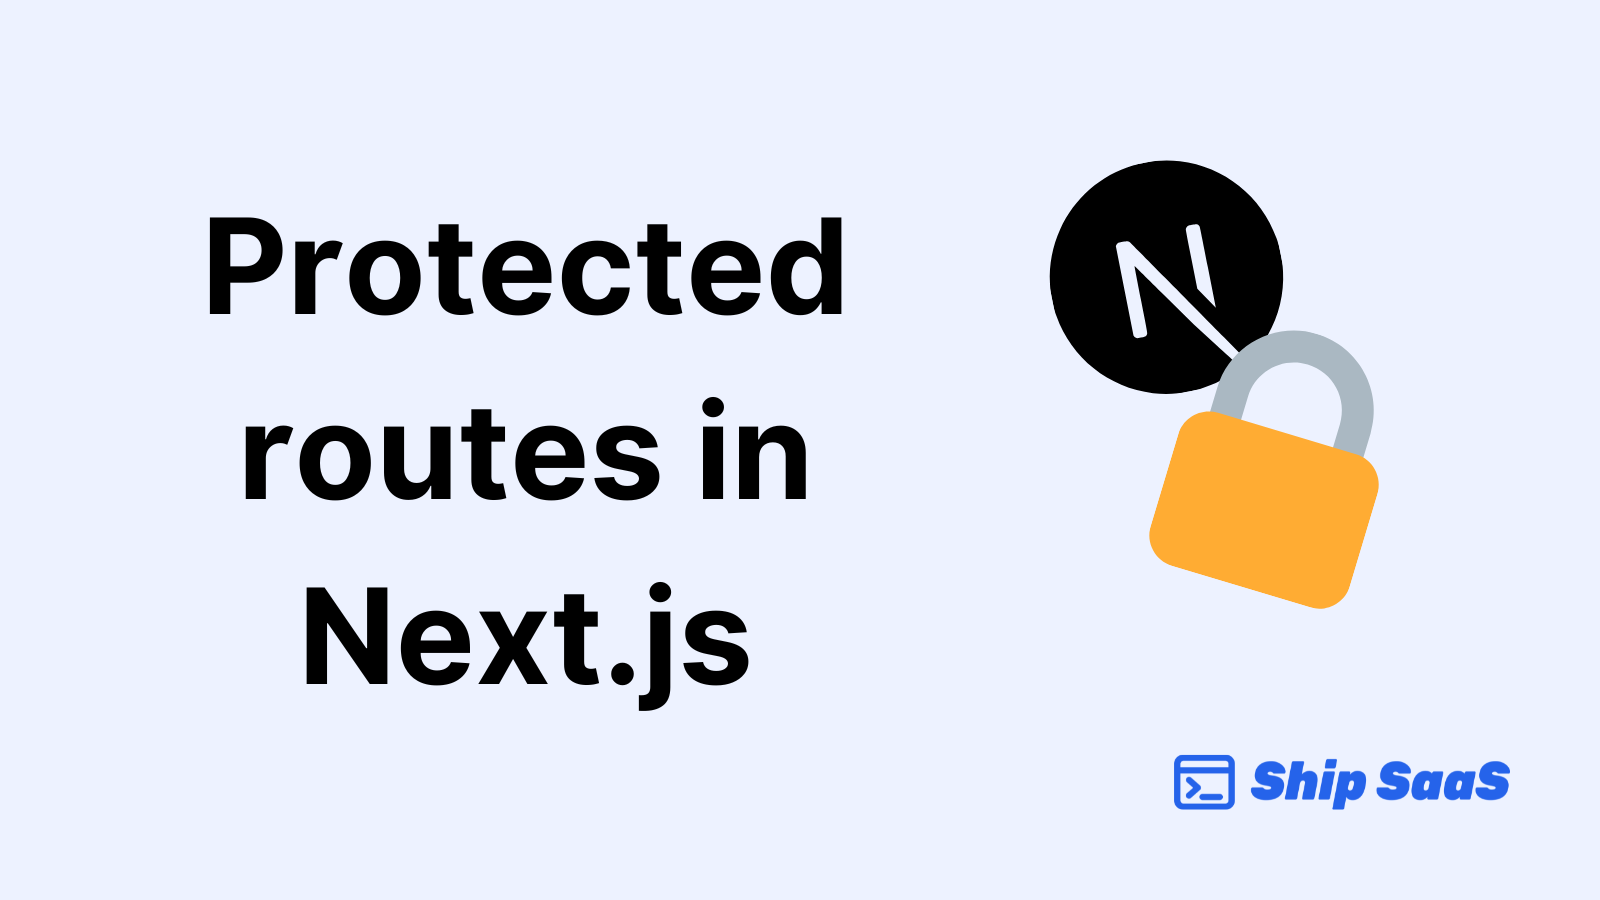 How to create a protected route in Next.js using middleware or getServerSideProps